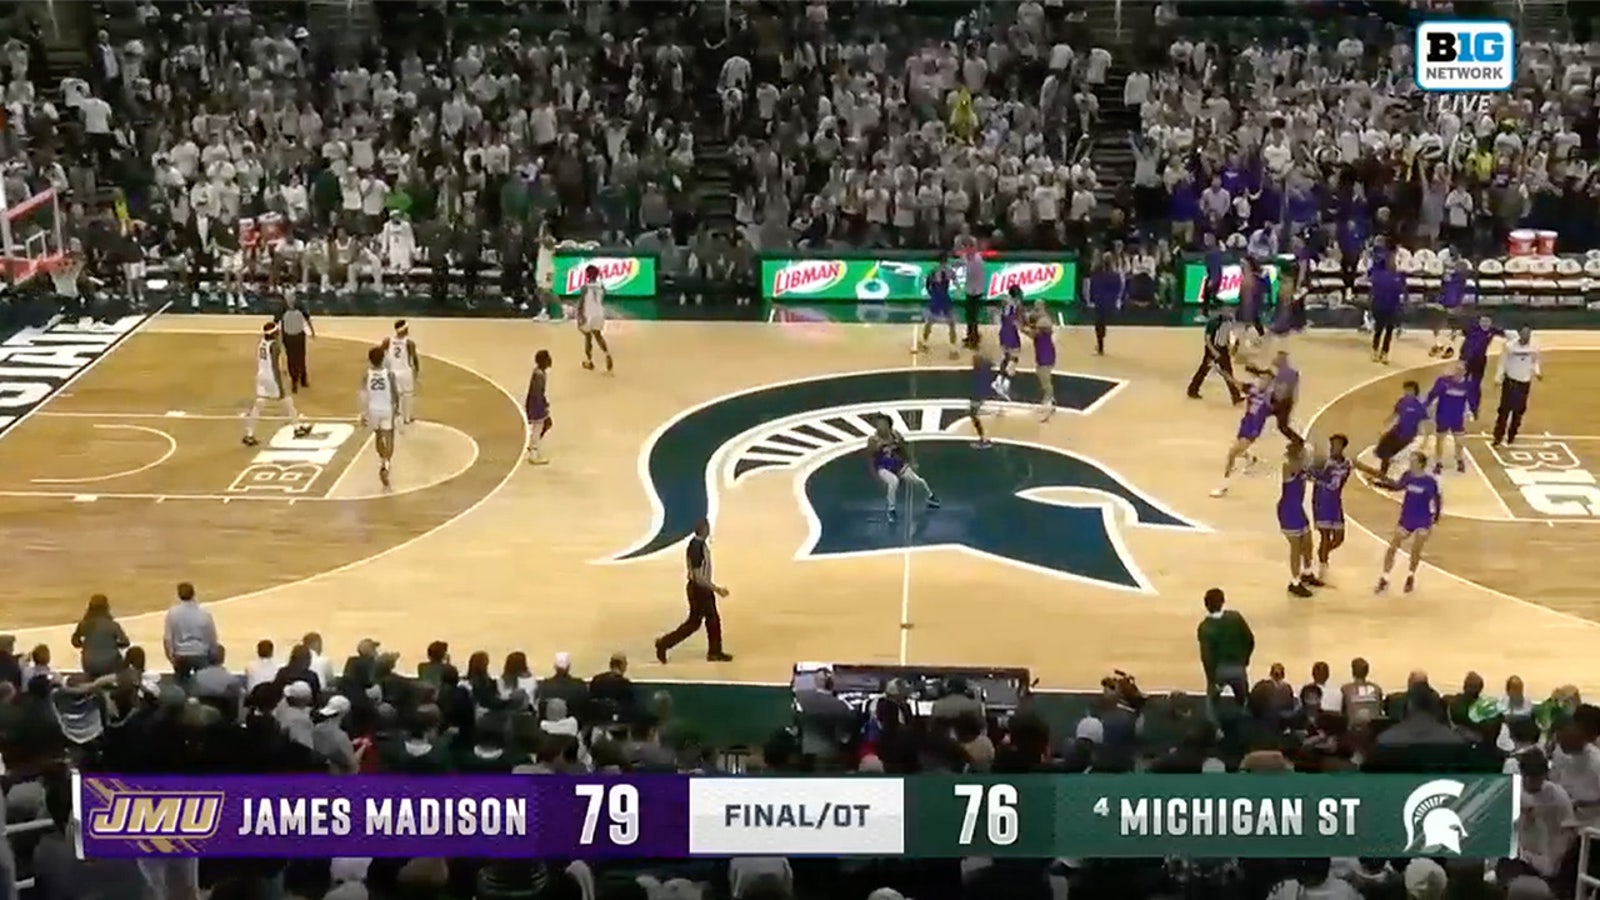 James Madison upsets No. 4 Michigan State 79-76 after Raekwon Horton's three in Overtime